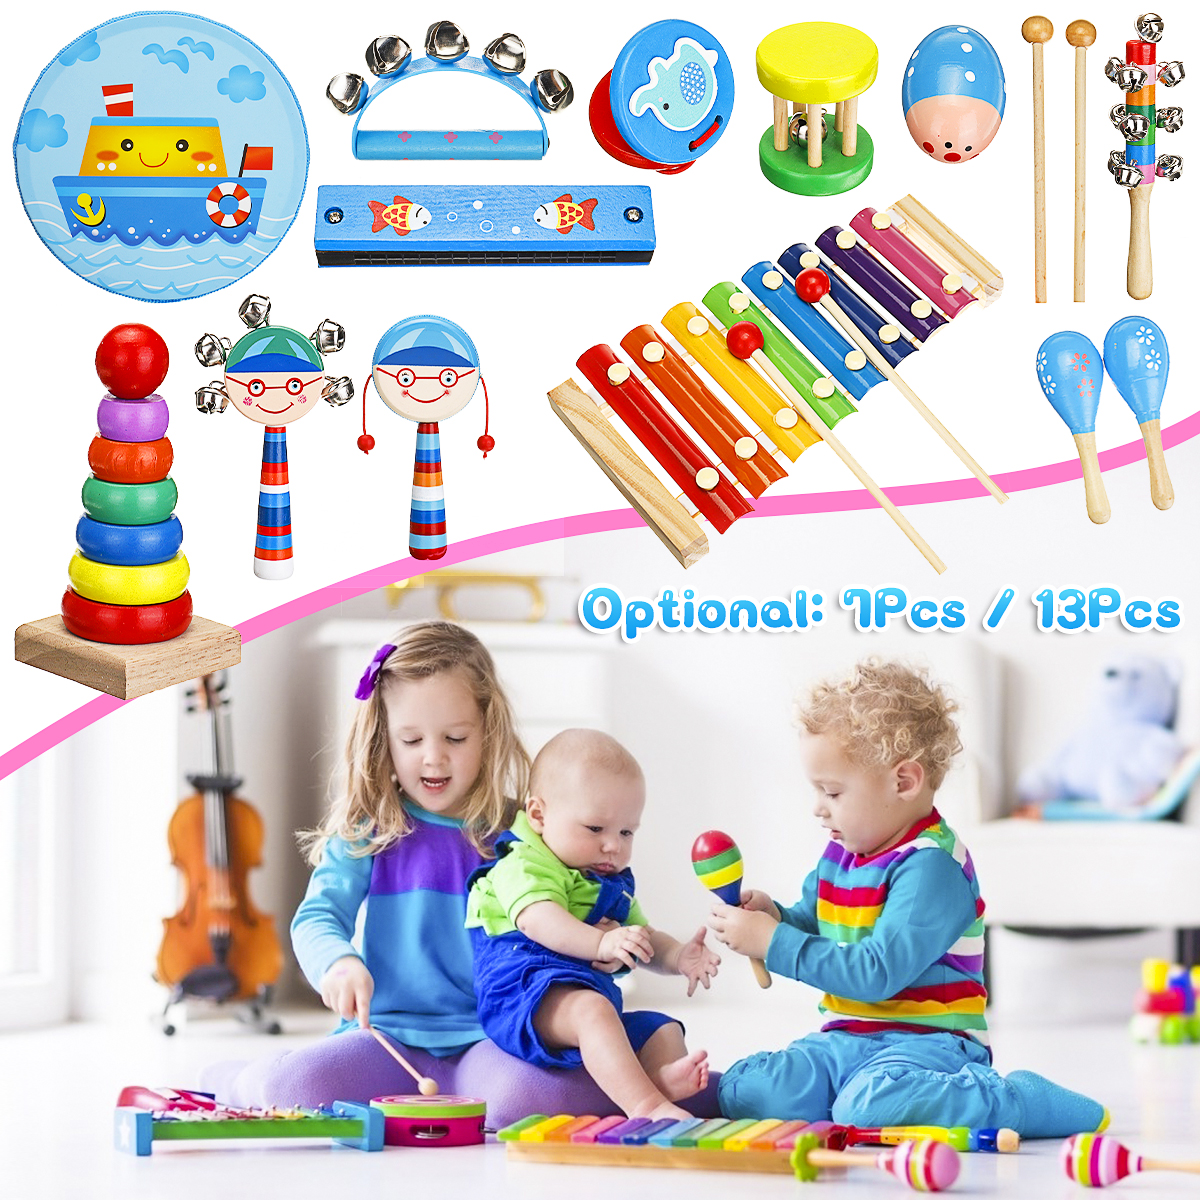 713-Pcs-Colorful-Musical-Percussion-Safe-Non-toxic-Instruments-Kit-Early-Educational-Toy-for-Kids-Gi-1805313-1